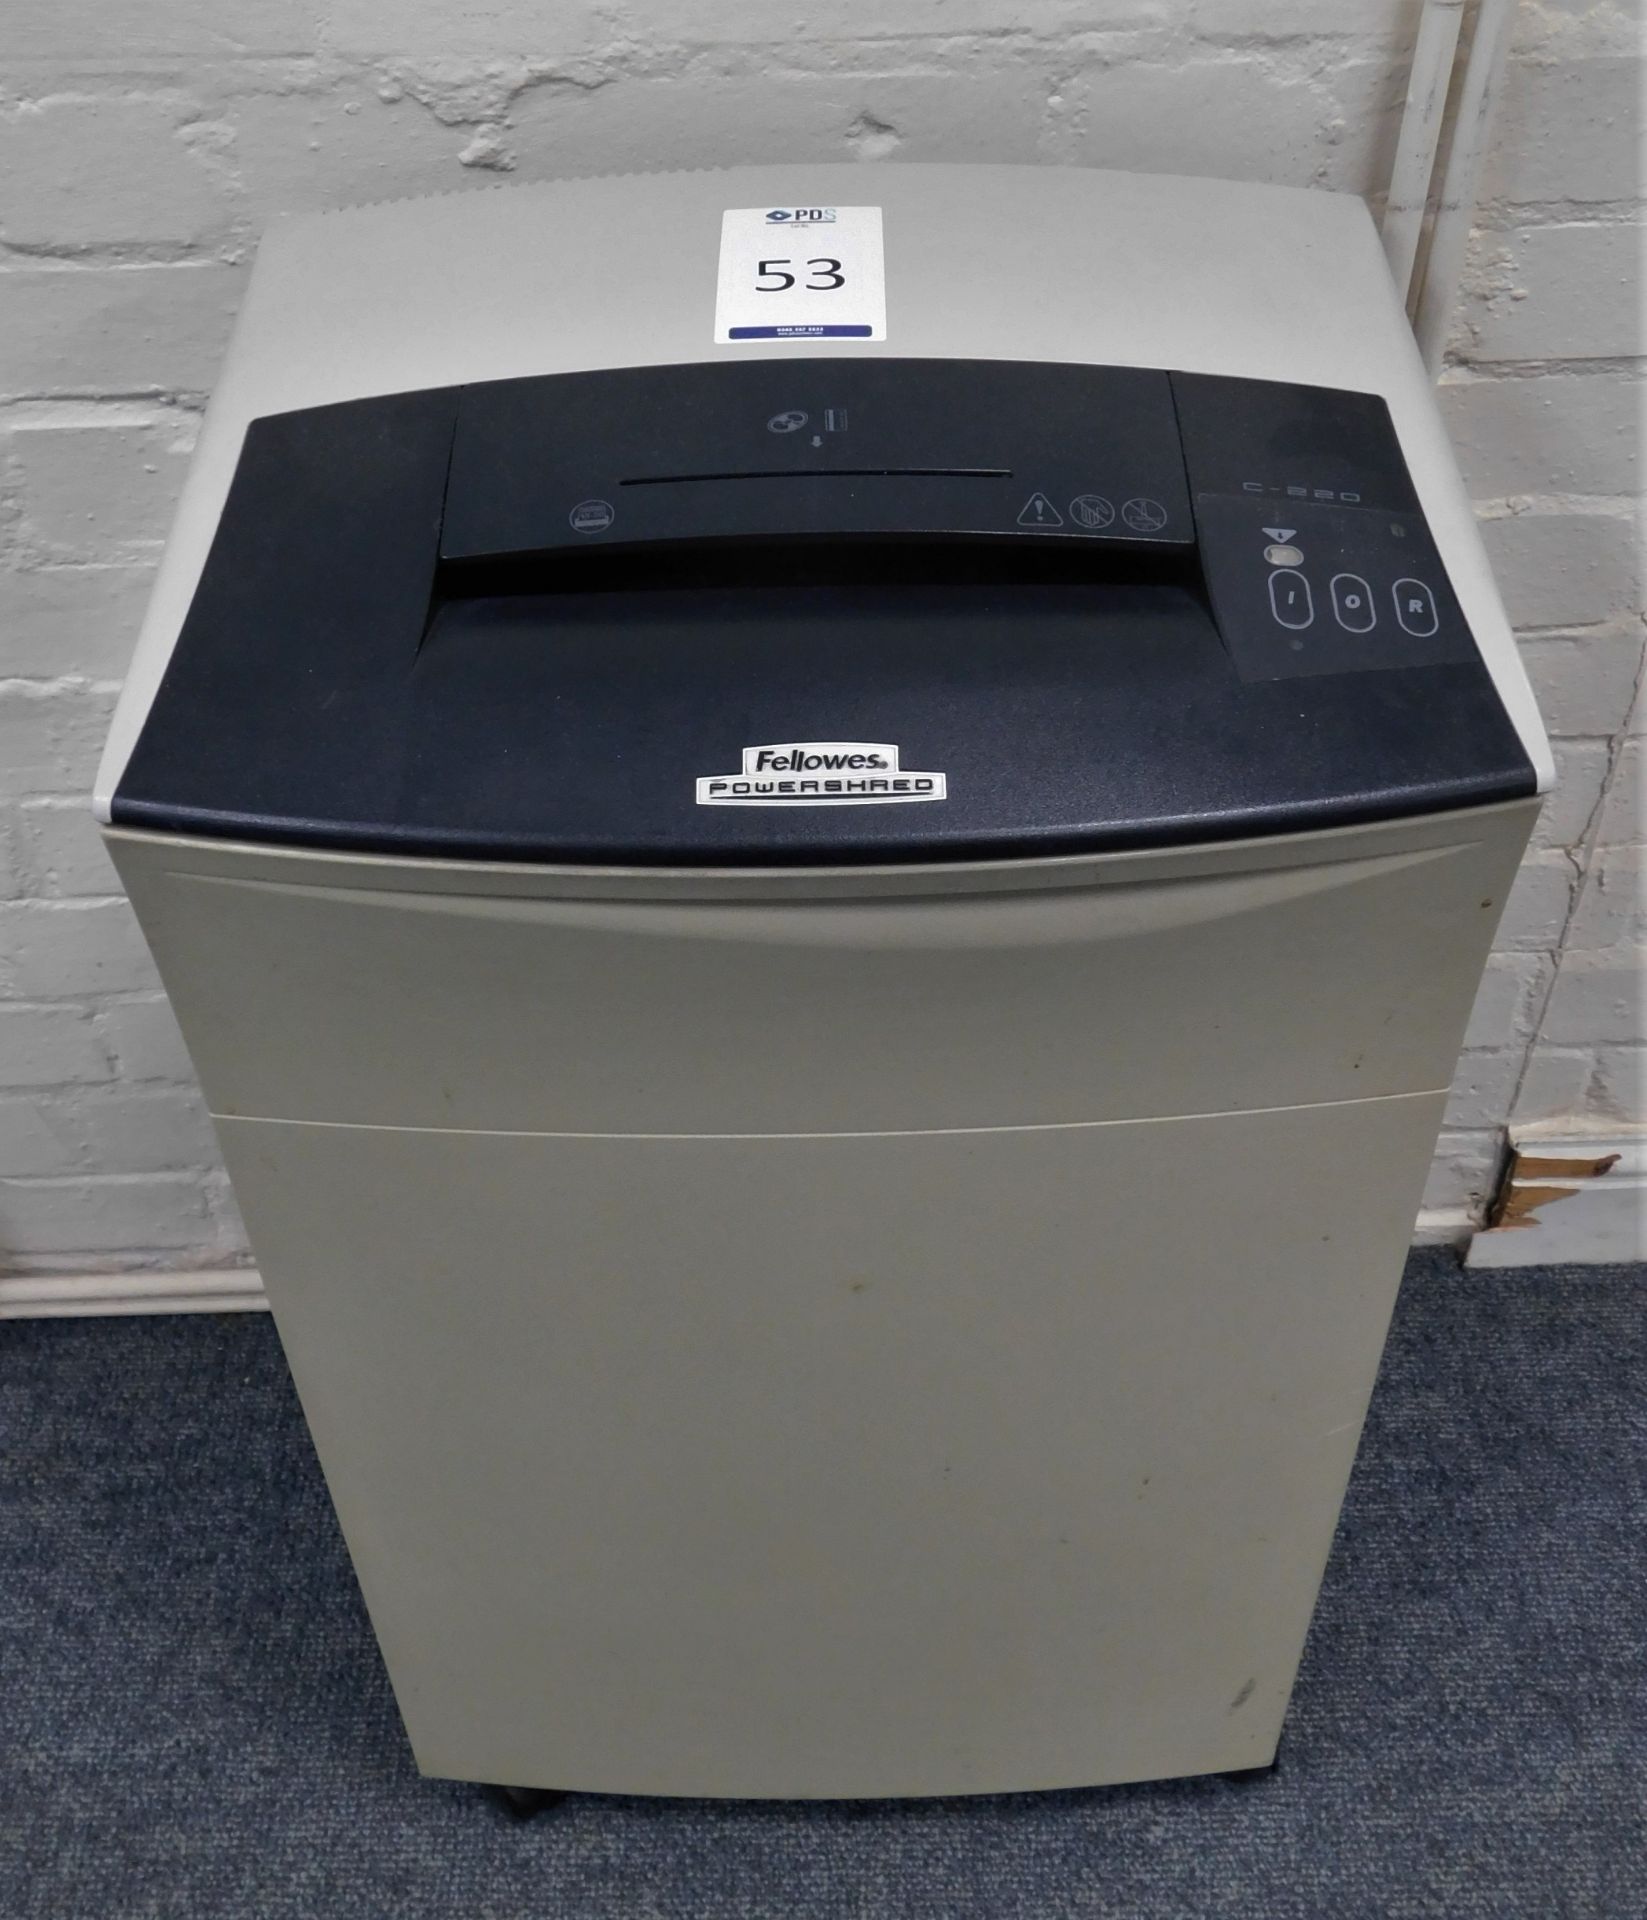 Fellows C-220 Powershred Paper Shredder (Location: Hatfield - See General Notes for More Details)